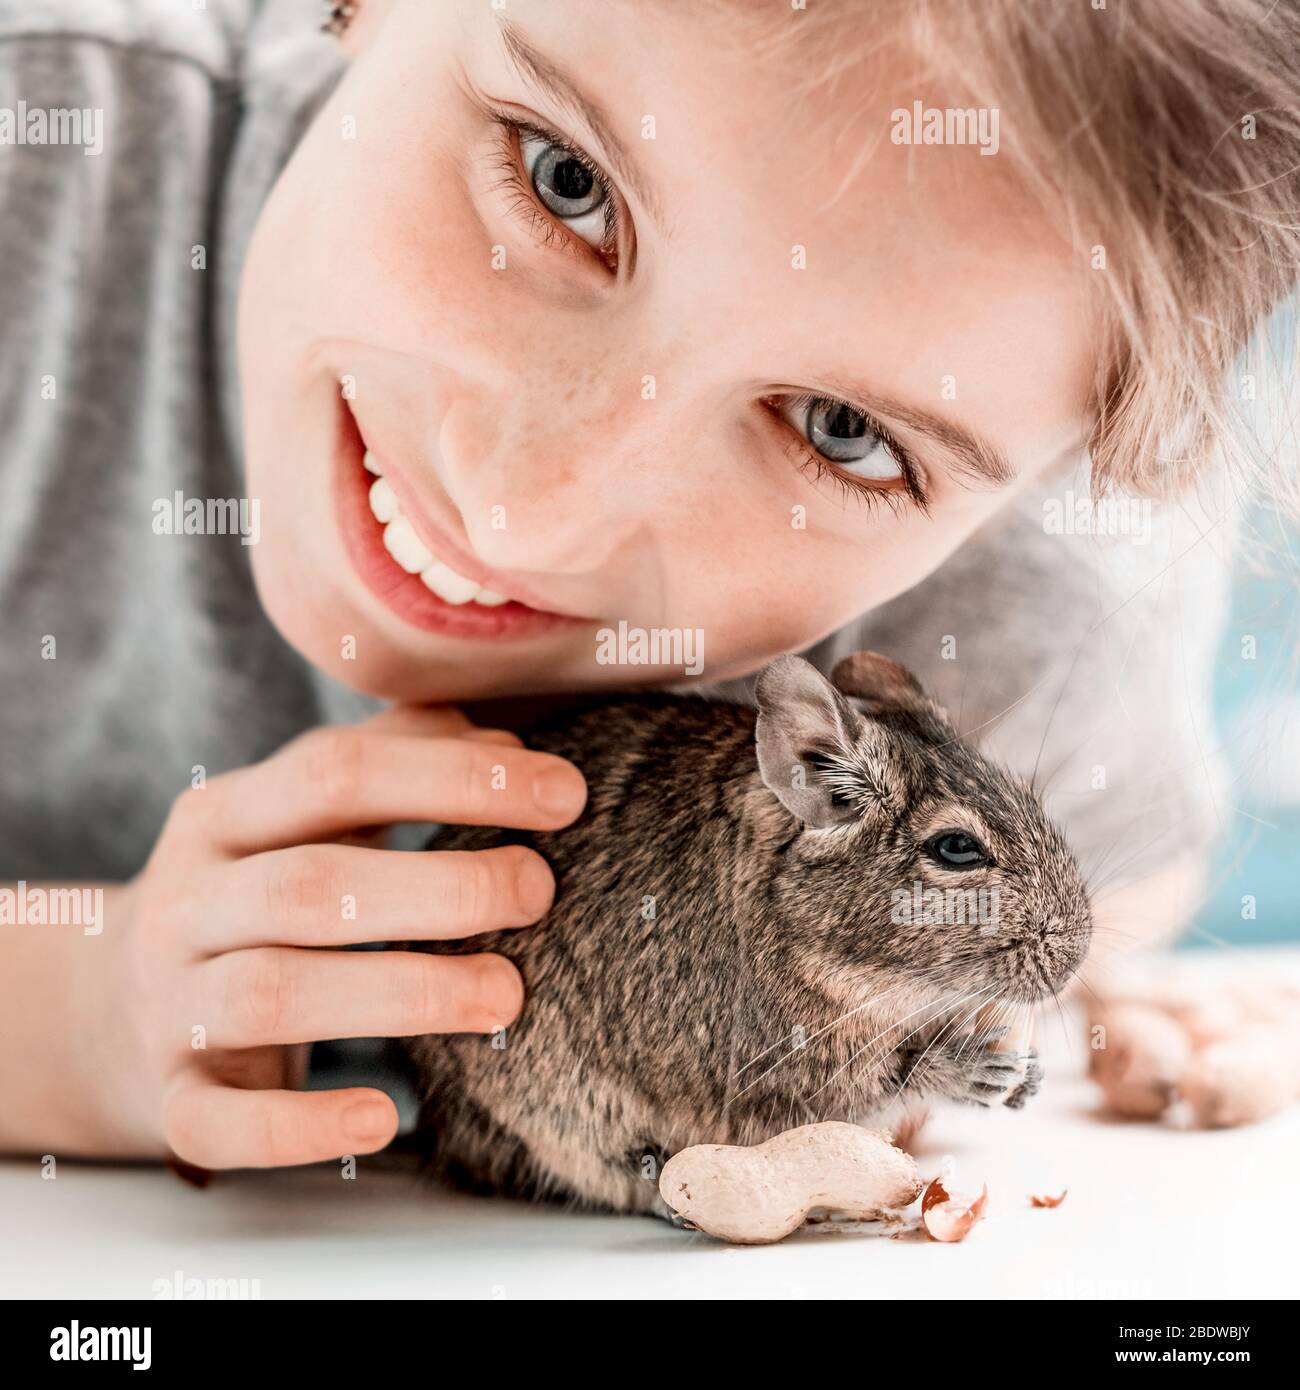 Portrait of young girl with degu squirrel and nuts, close-up. Stock Photo